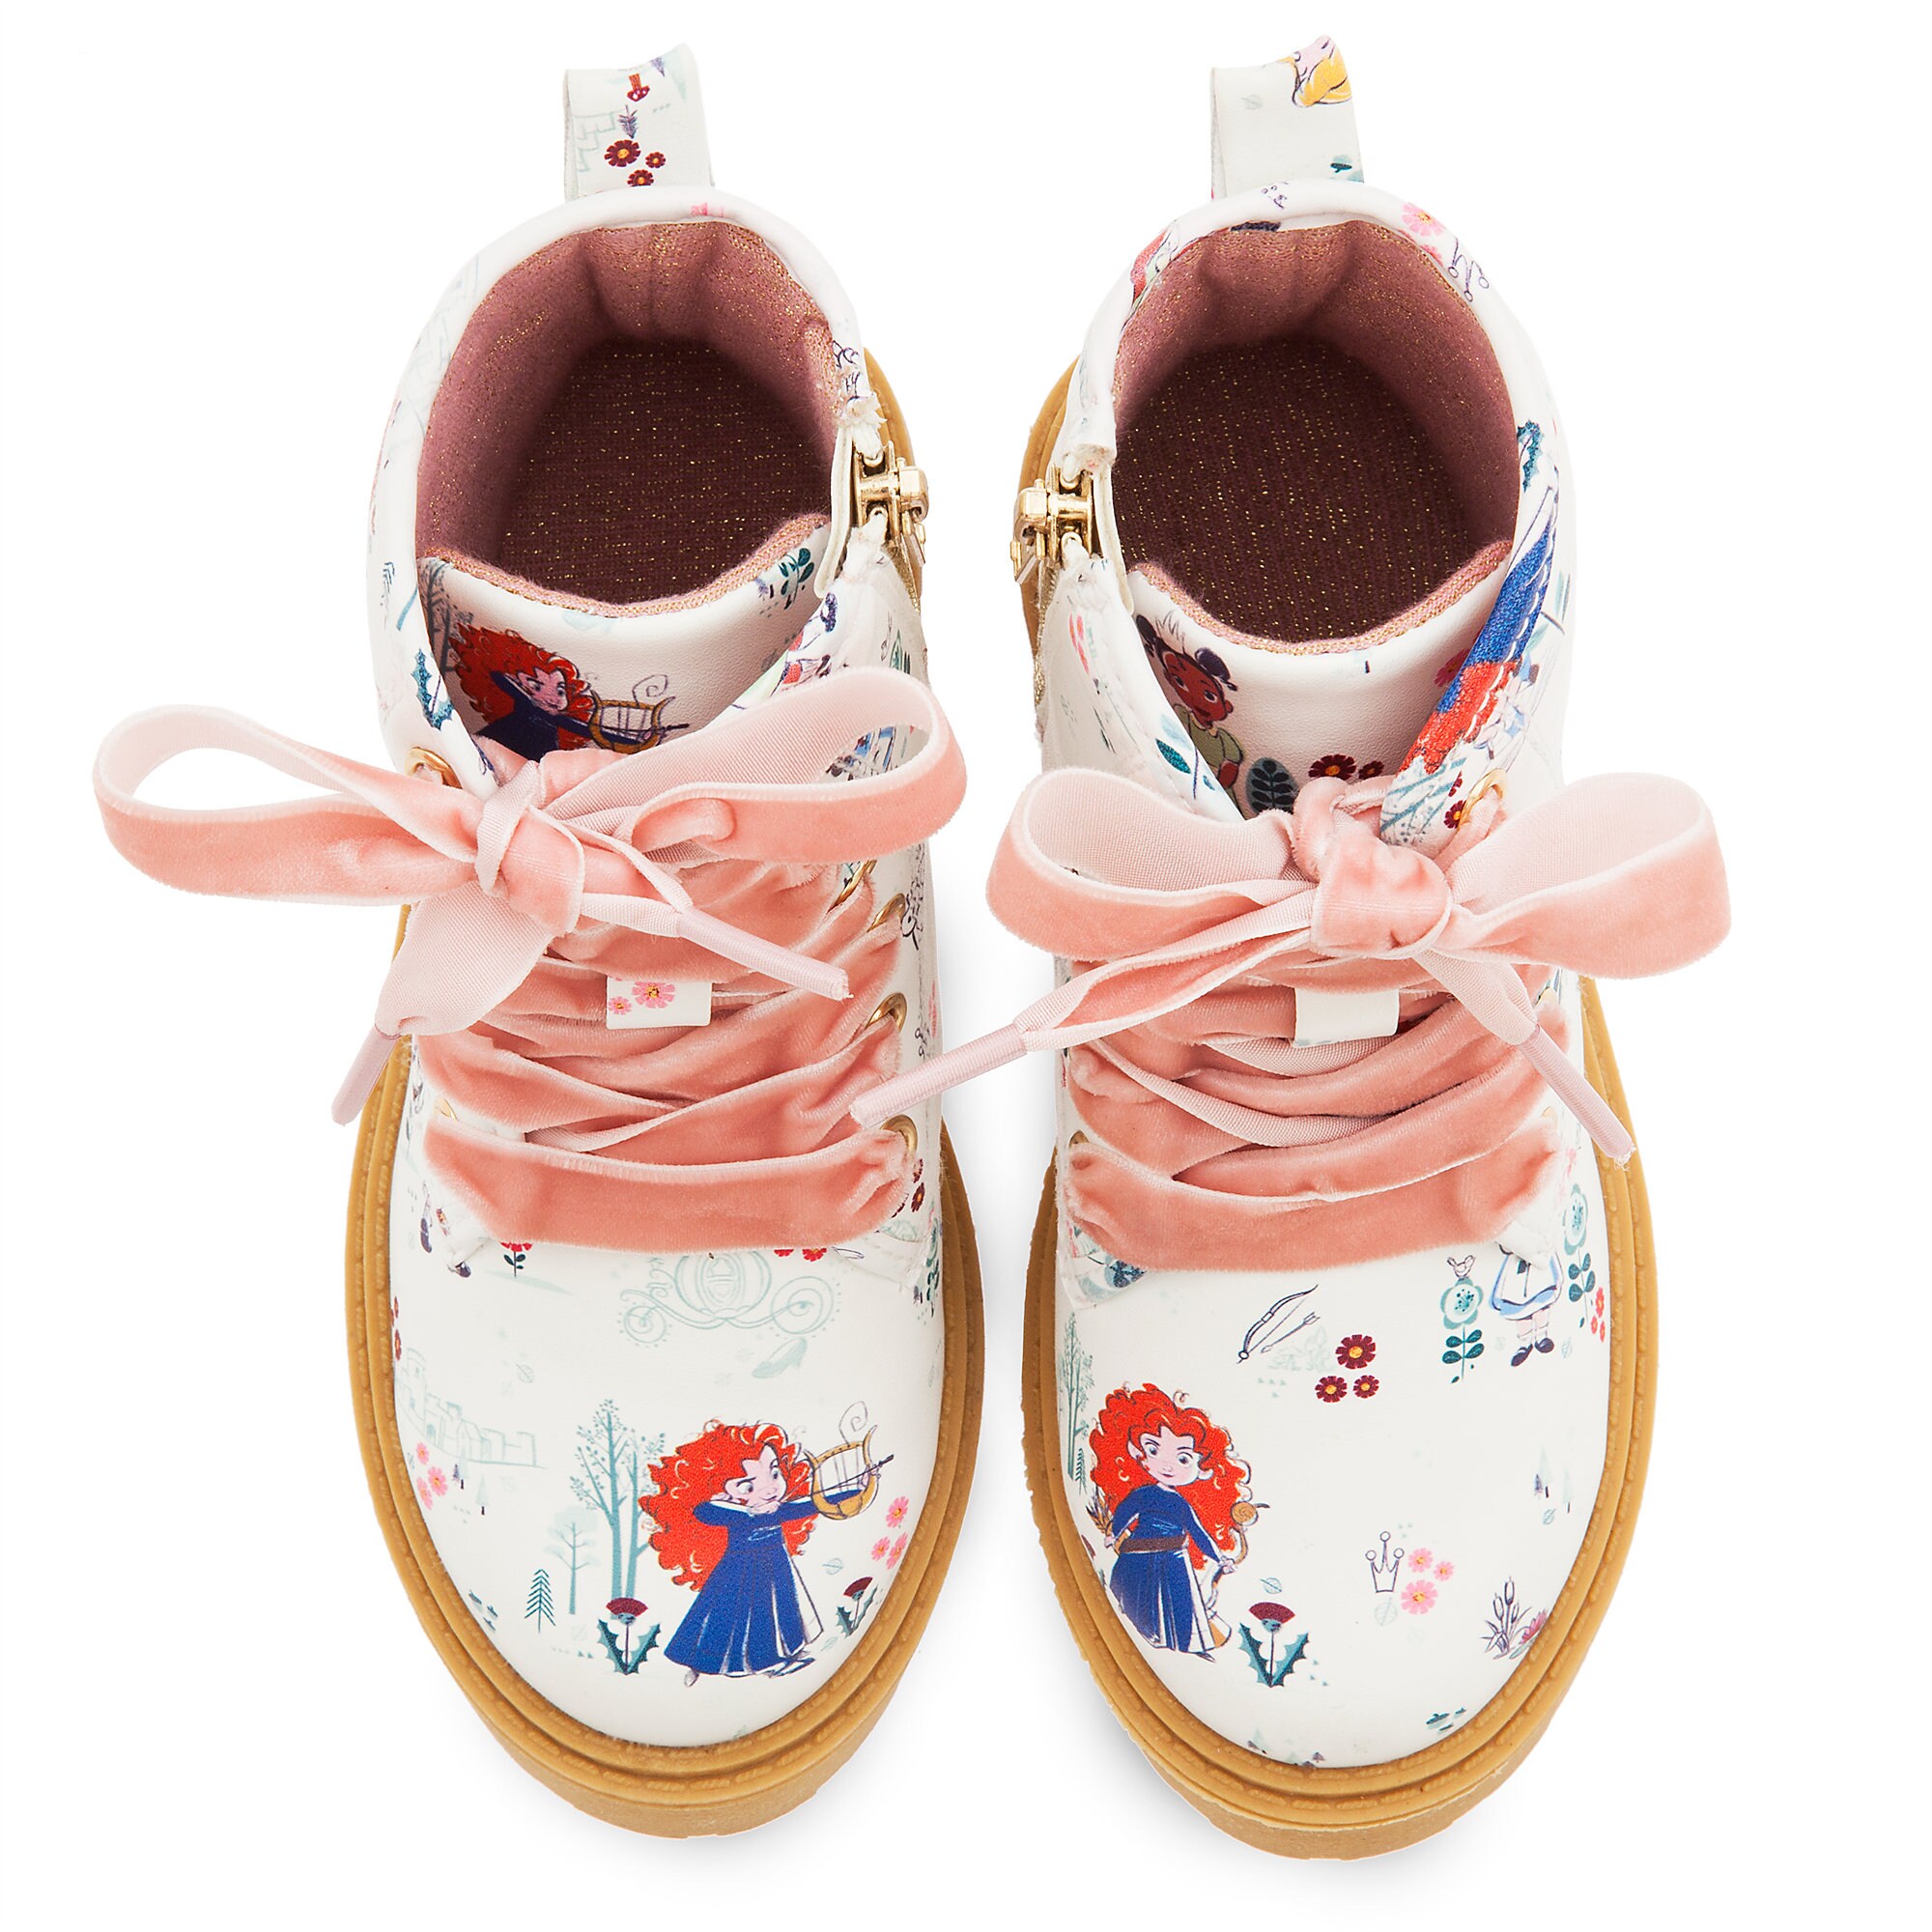 Disney Animators' Collection Boots for Girls